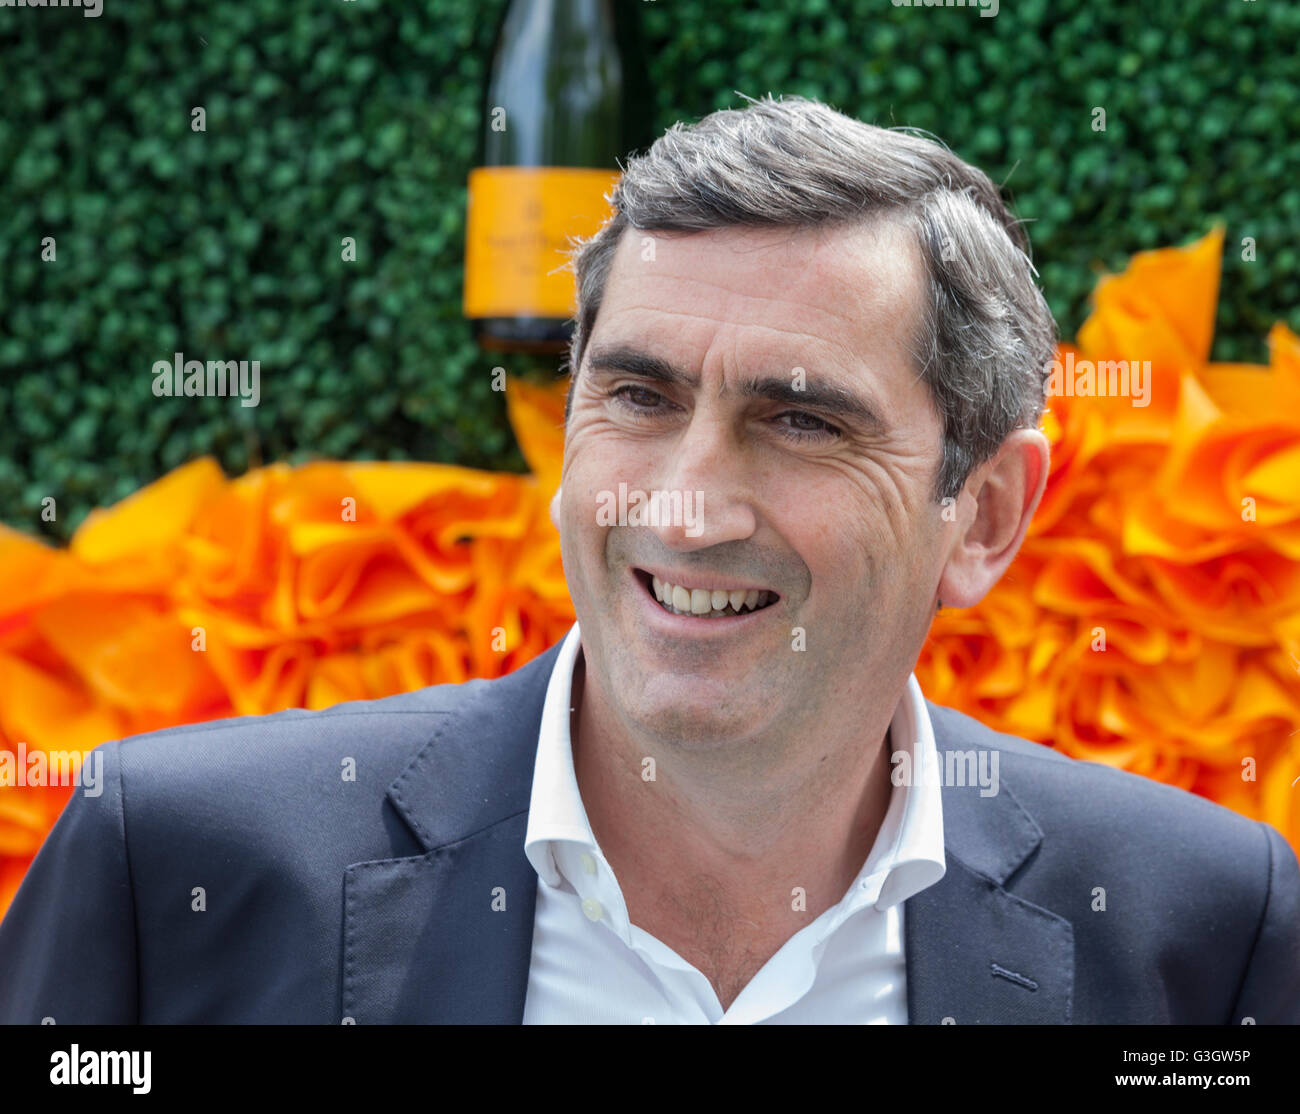 Jean-Marc Gallot mit Gast at the Veuve Clicquot Polo Classic in